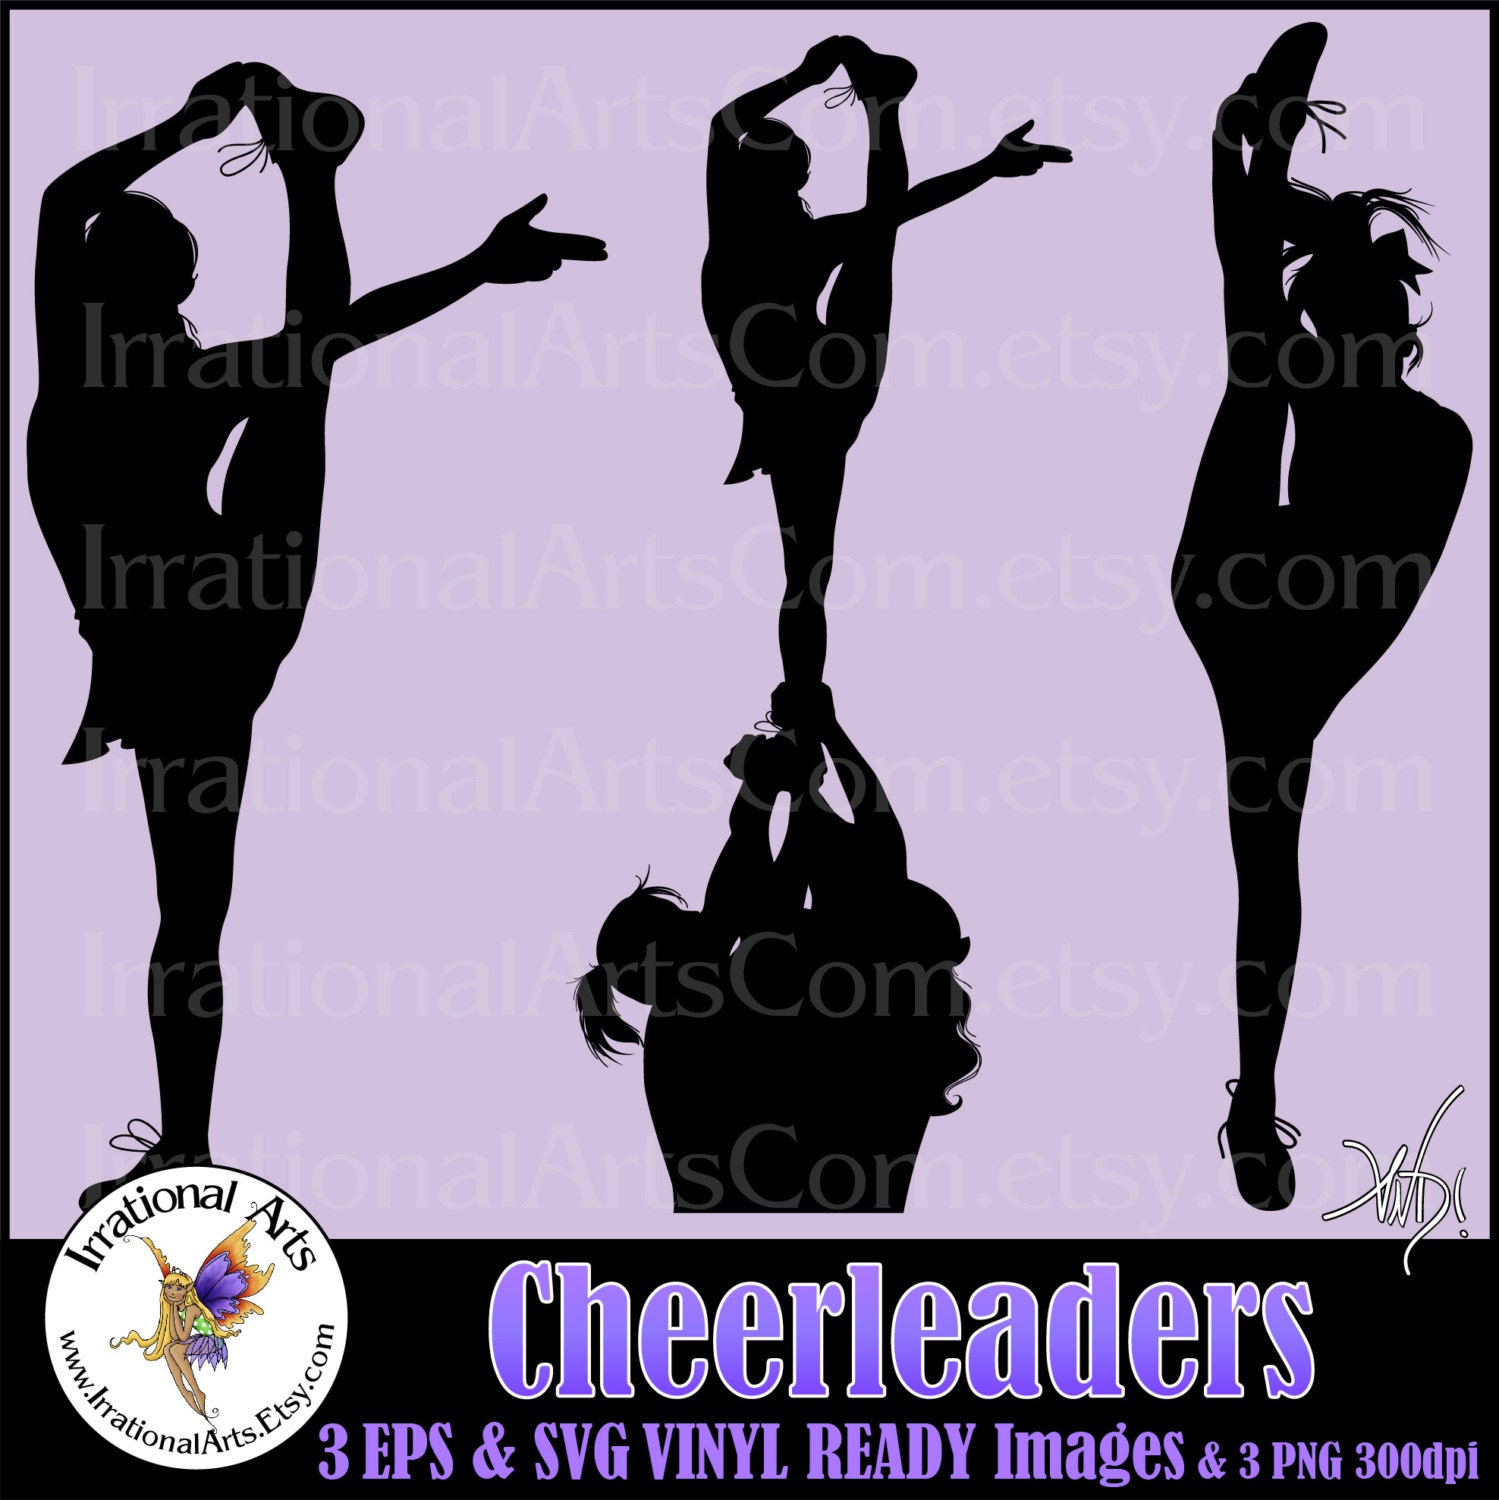 Download Cheerleader Silhouettes 3 EPS & SVG vinyl ready by ...